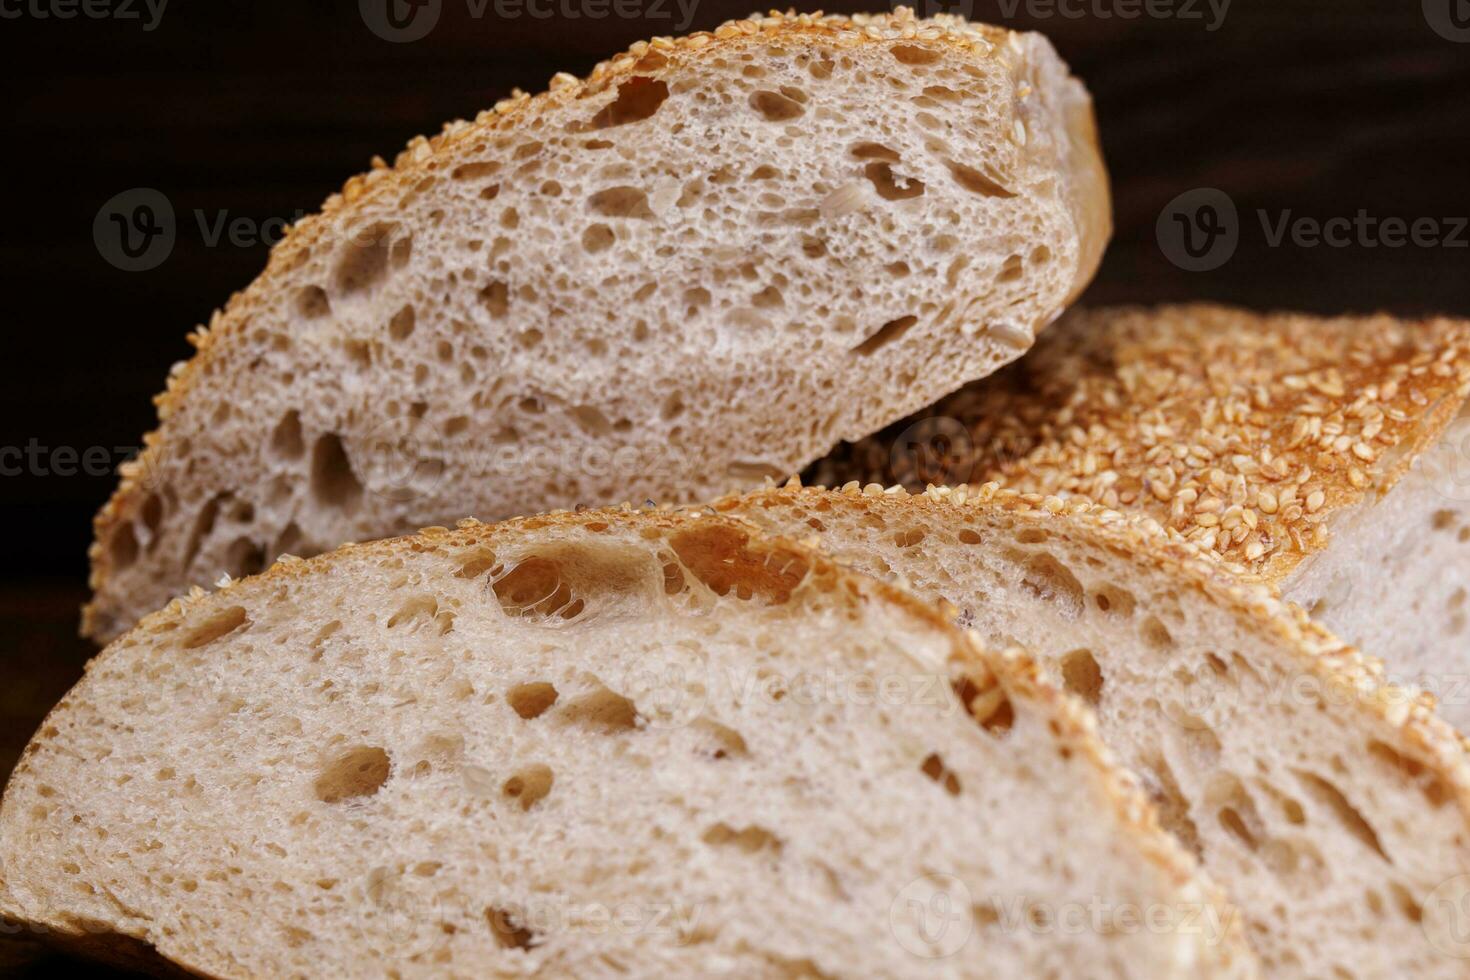 Cut loaf of bread and pieces of bread on a wooden background. Ciabatta bread. photo